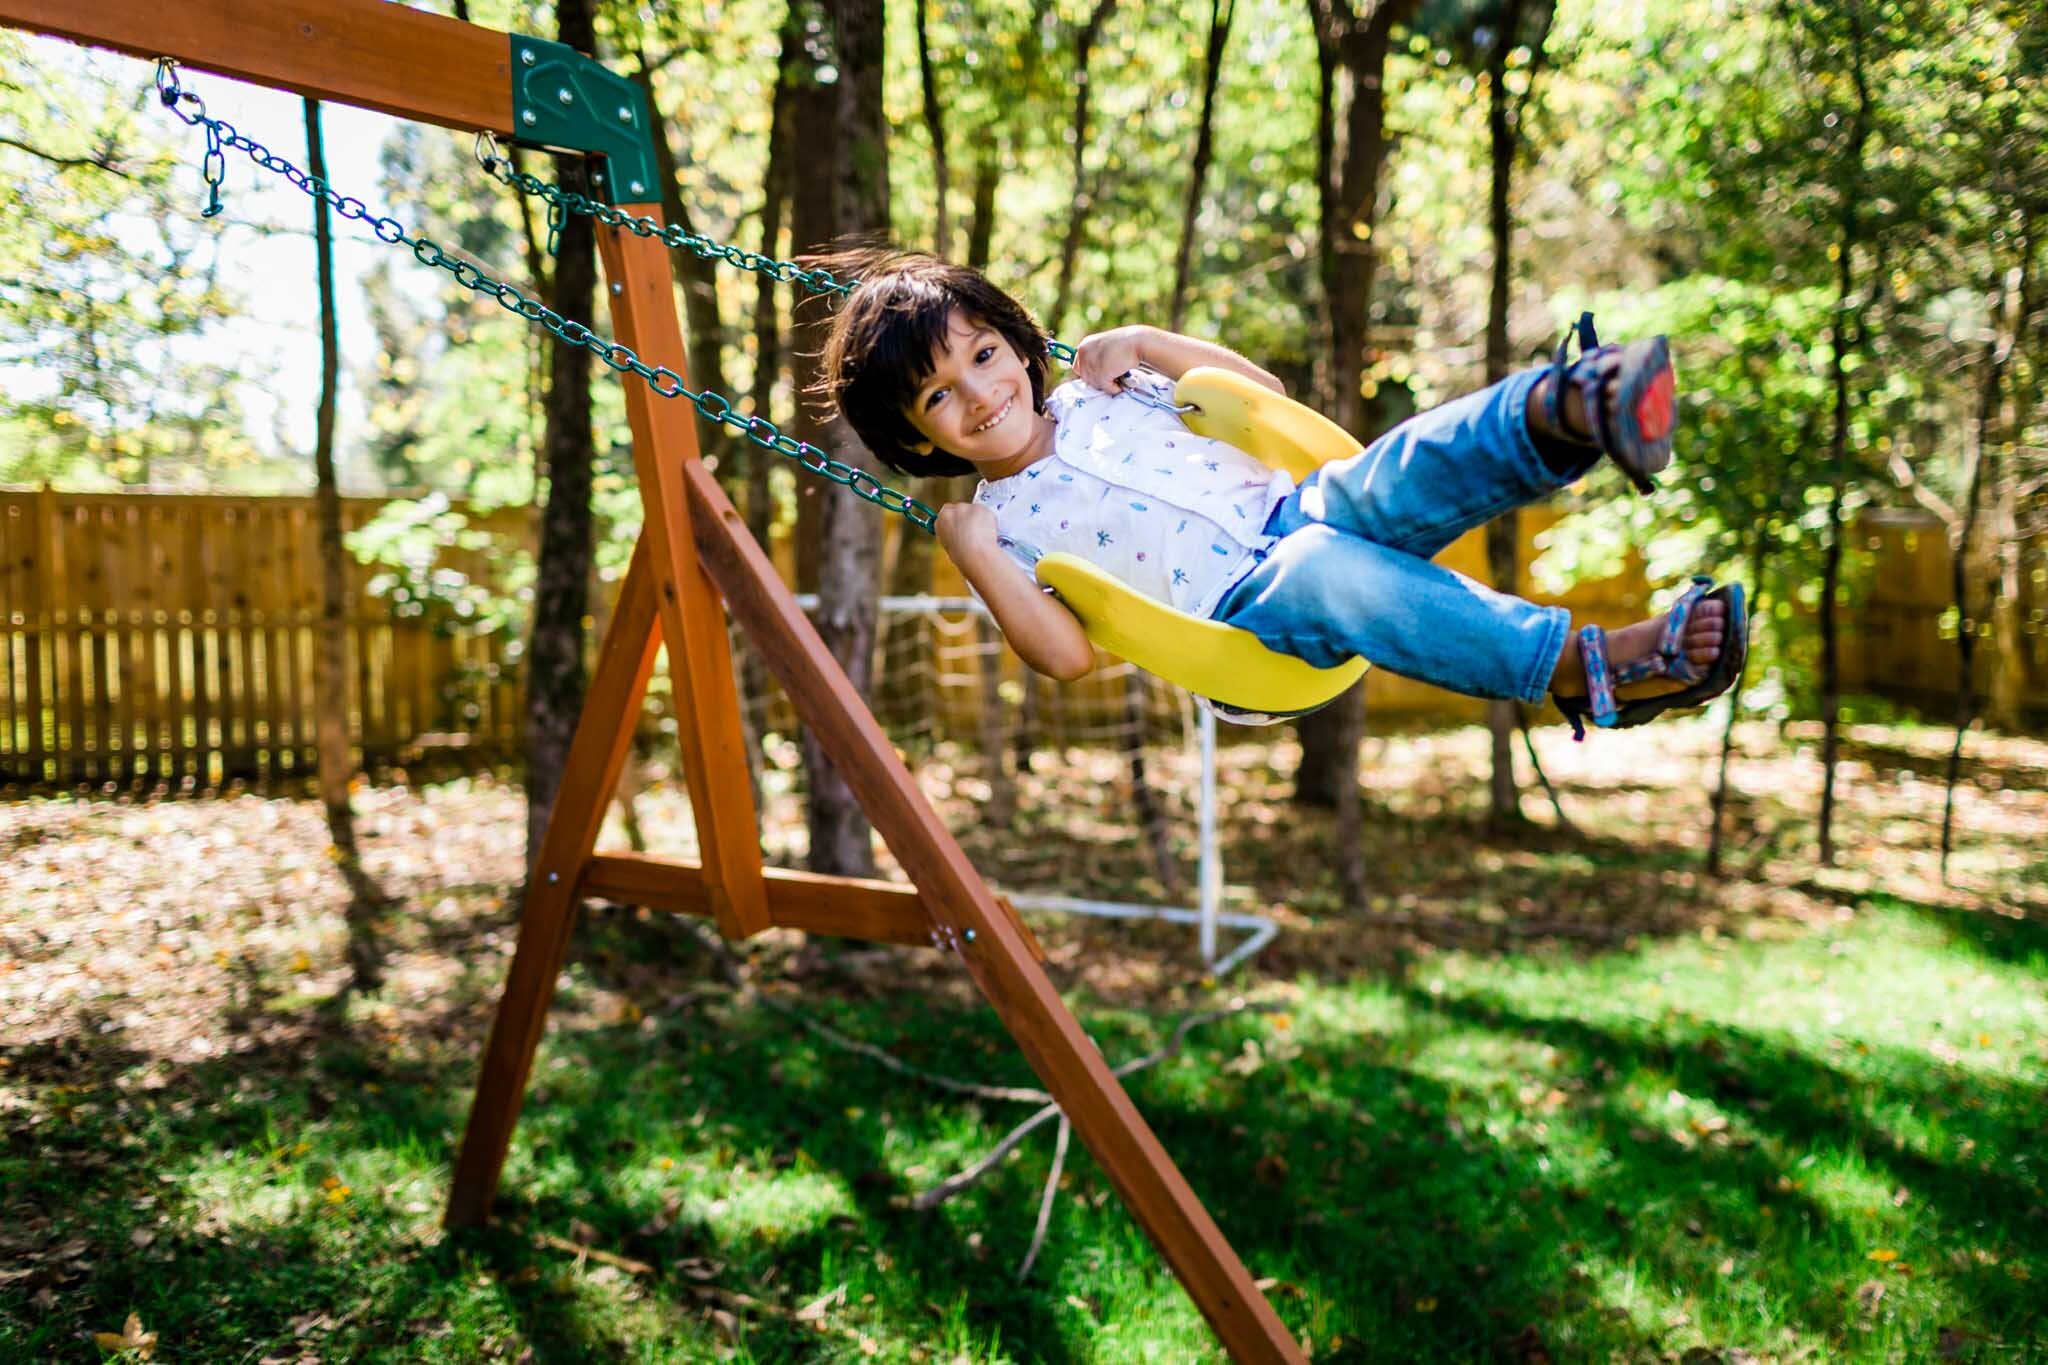 Durham Family Photographer | By G. Lin Photography | Lifestyle family photography of boy swinging